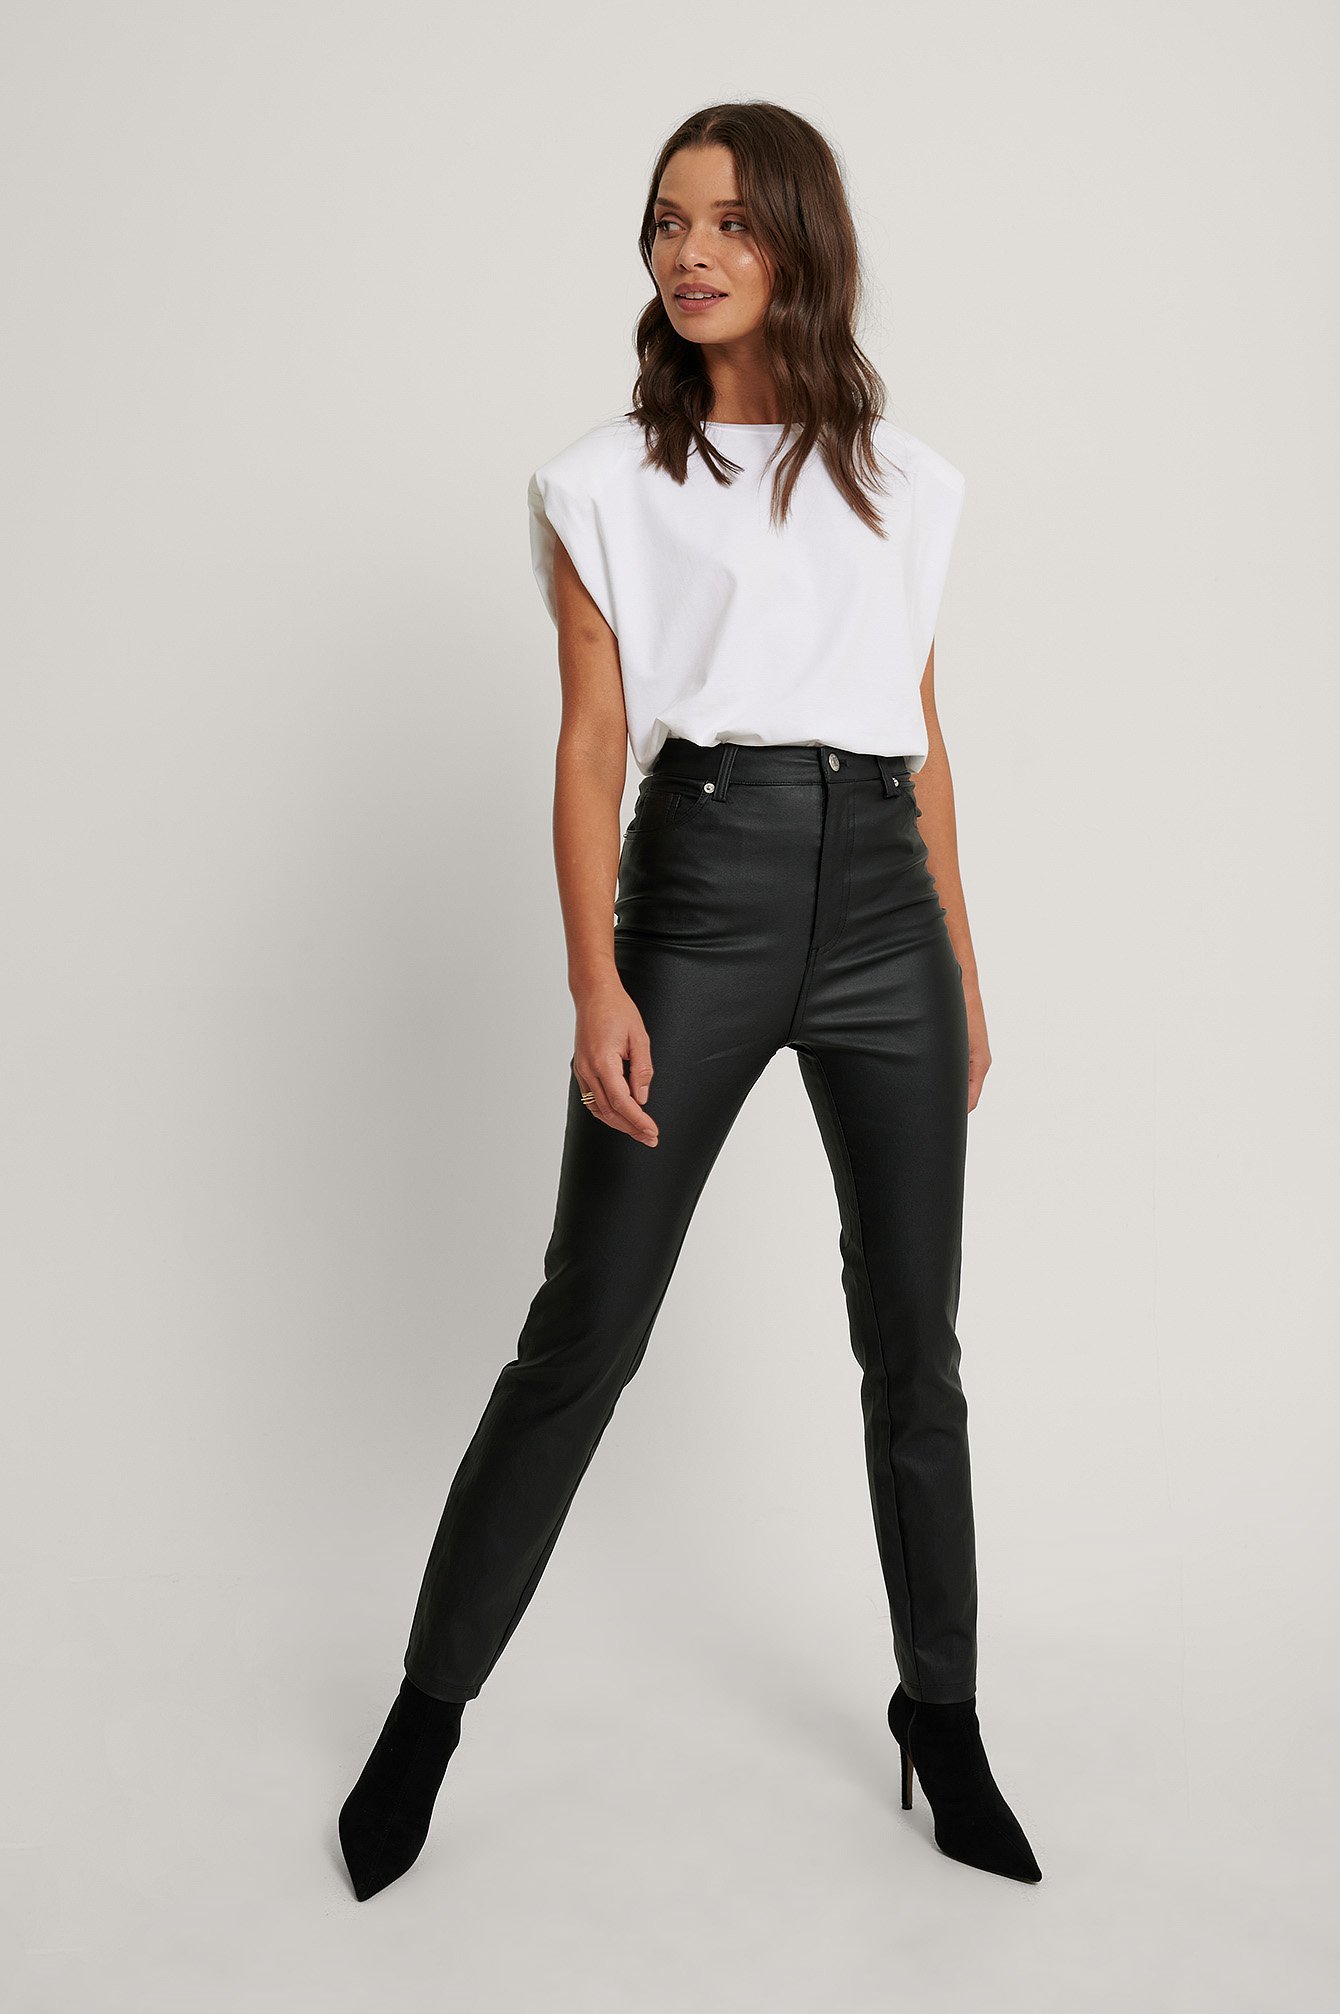 Waxed High Waist Trousers Outfit.